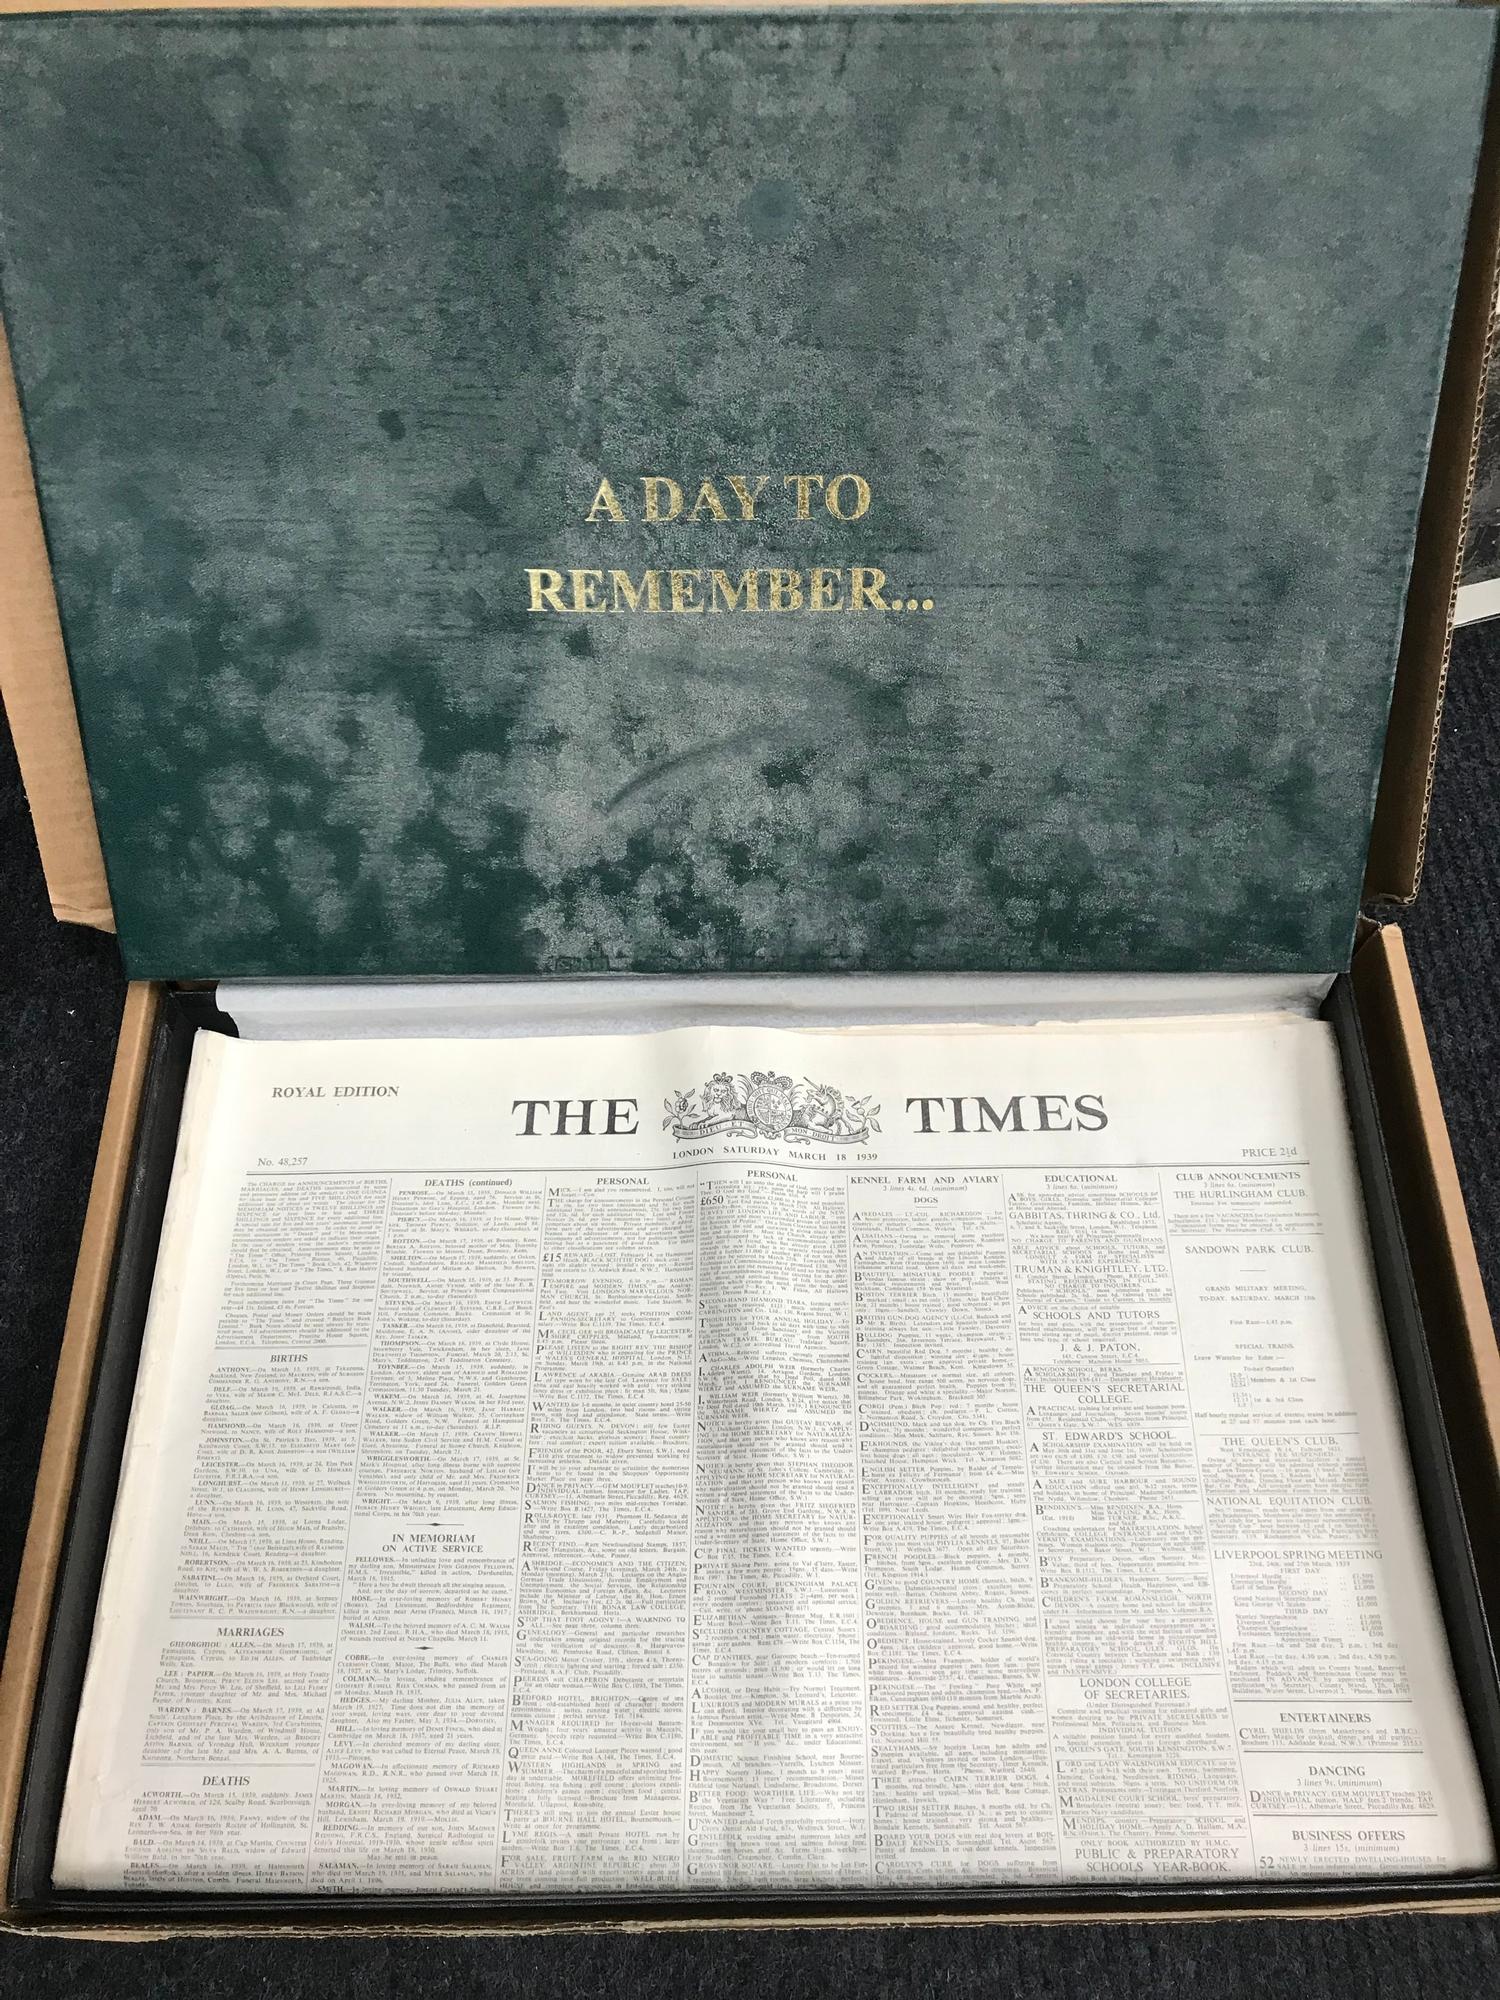 Original 1939 A Day to remember The Times newspaper with protective box.